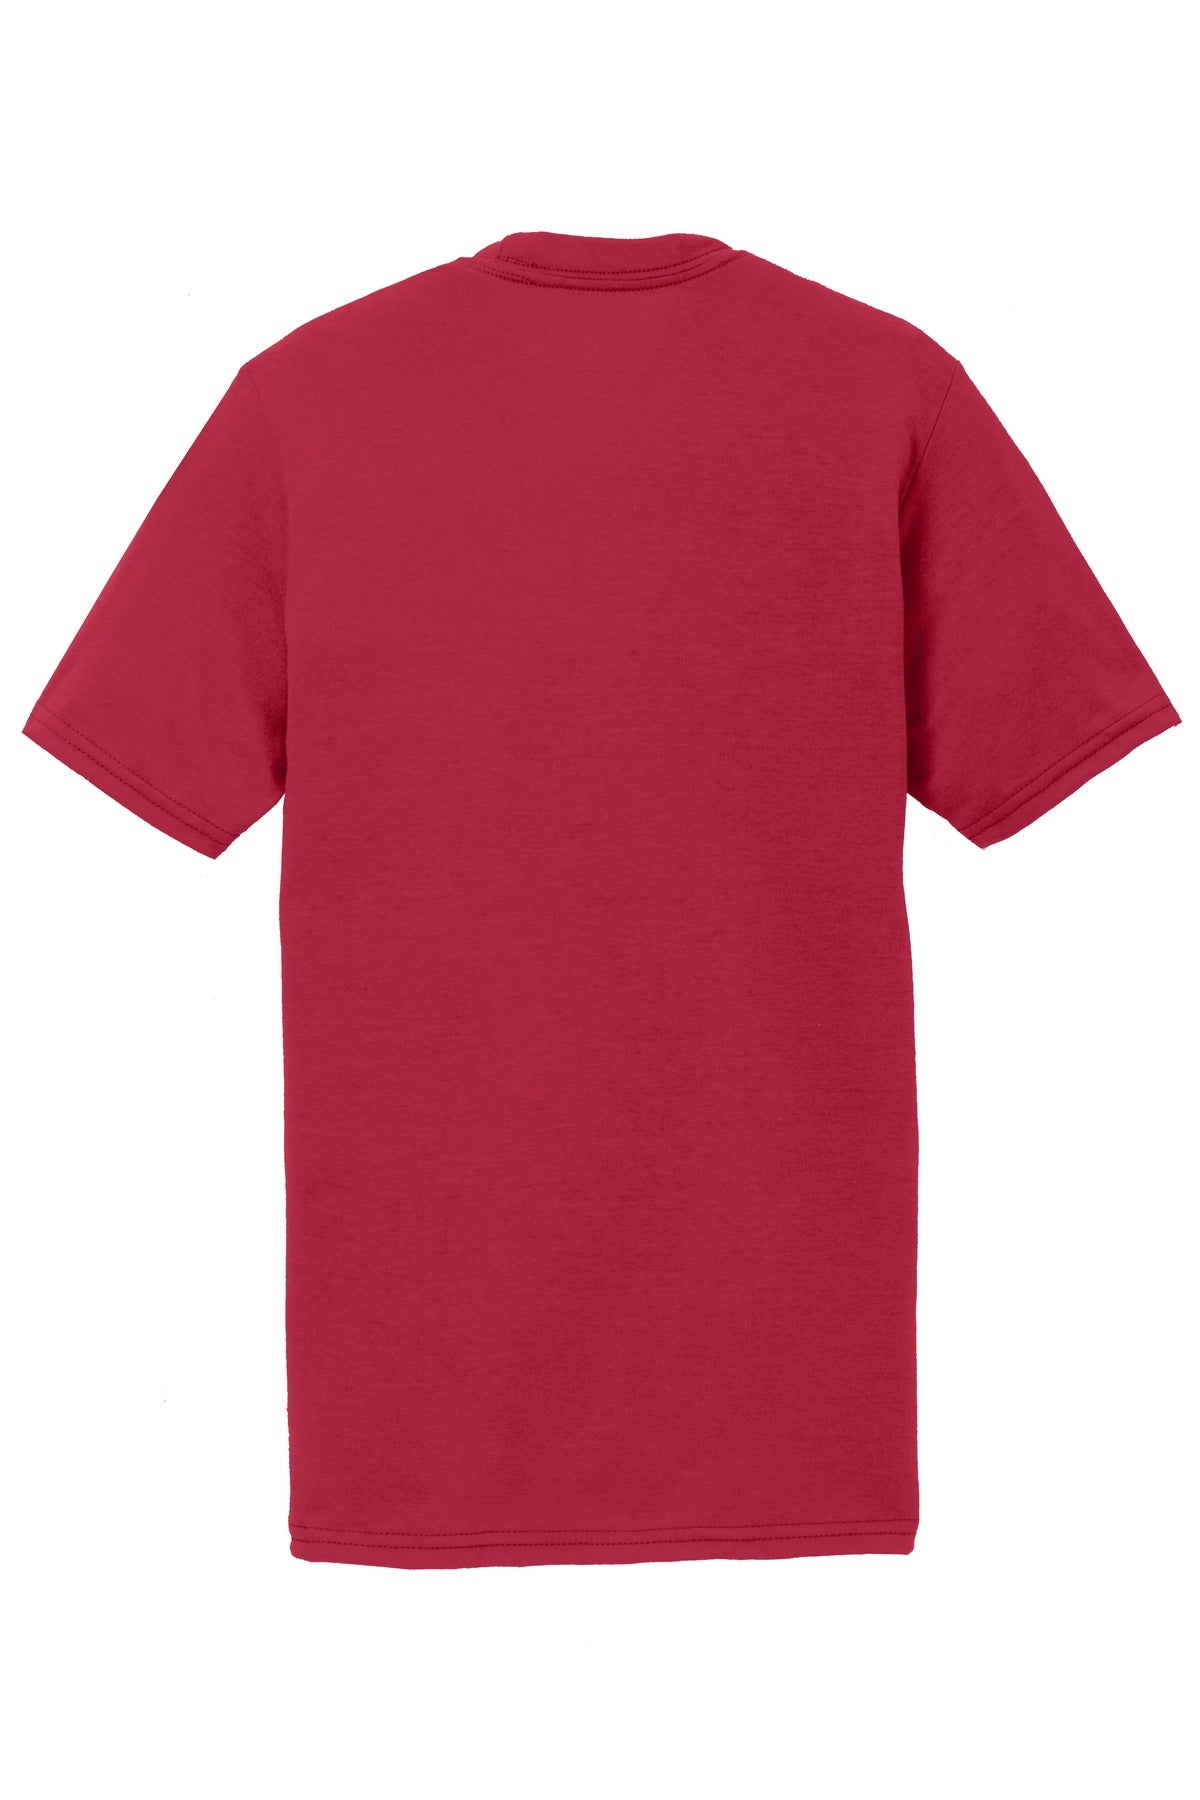 Port & Company Youth Performance Blend Tee. PC381Y